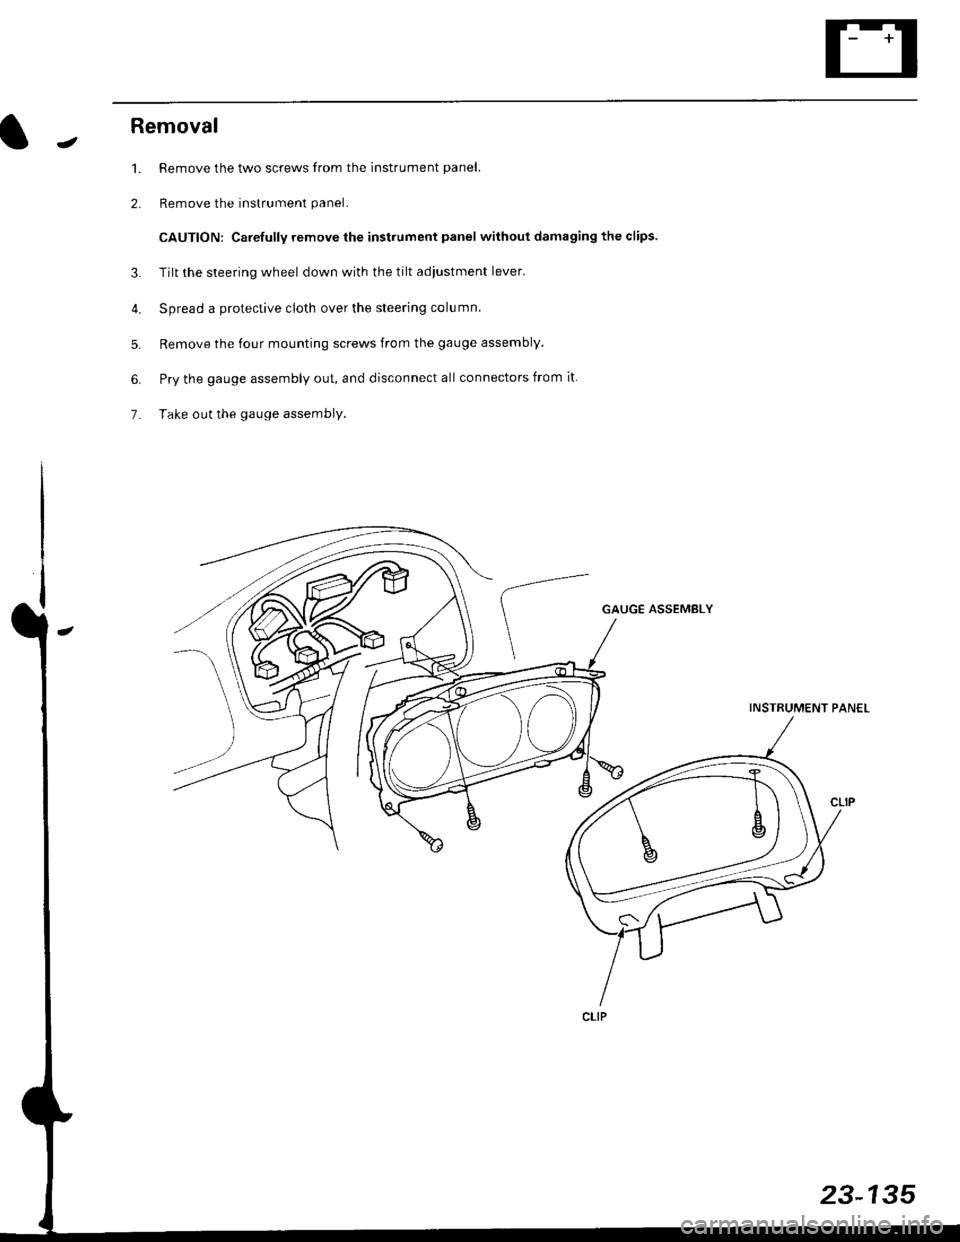 HONDA CIVIC 1997 6.G Workshop Manual JRemoval
1. Remove the two screws from the instrument panel.
2. Remove the instrument panel.
CAUTION: Carefully remove the instrument panel without damaging the clips.
3. Tilt the steering wheel down 